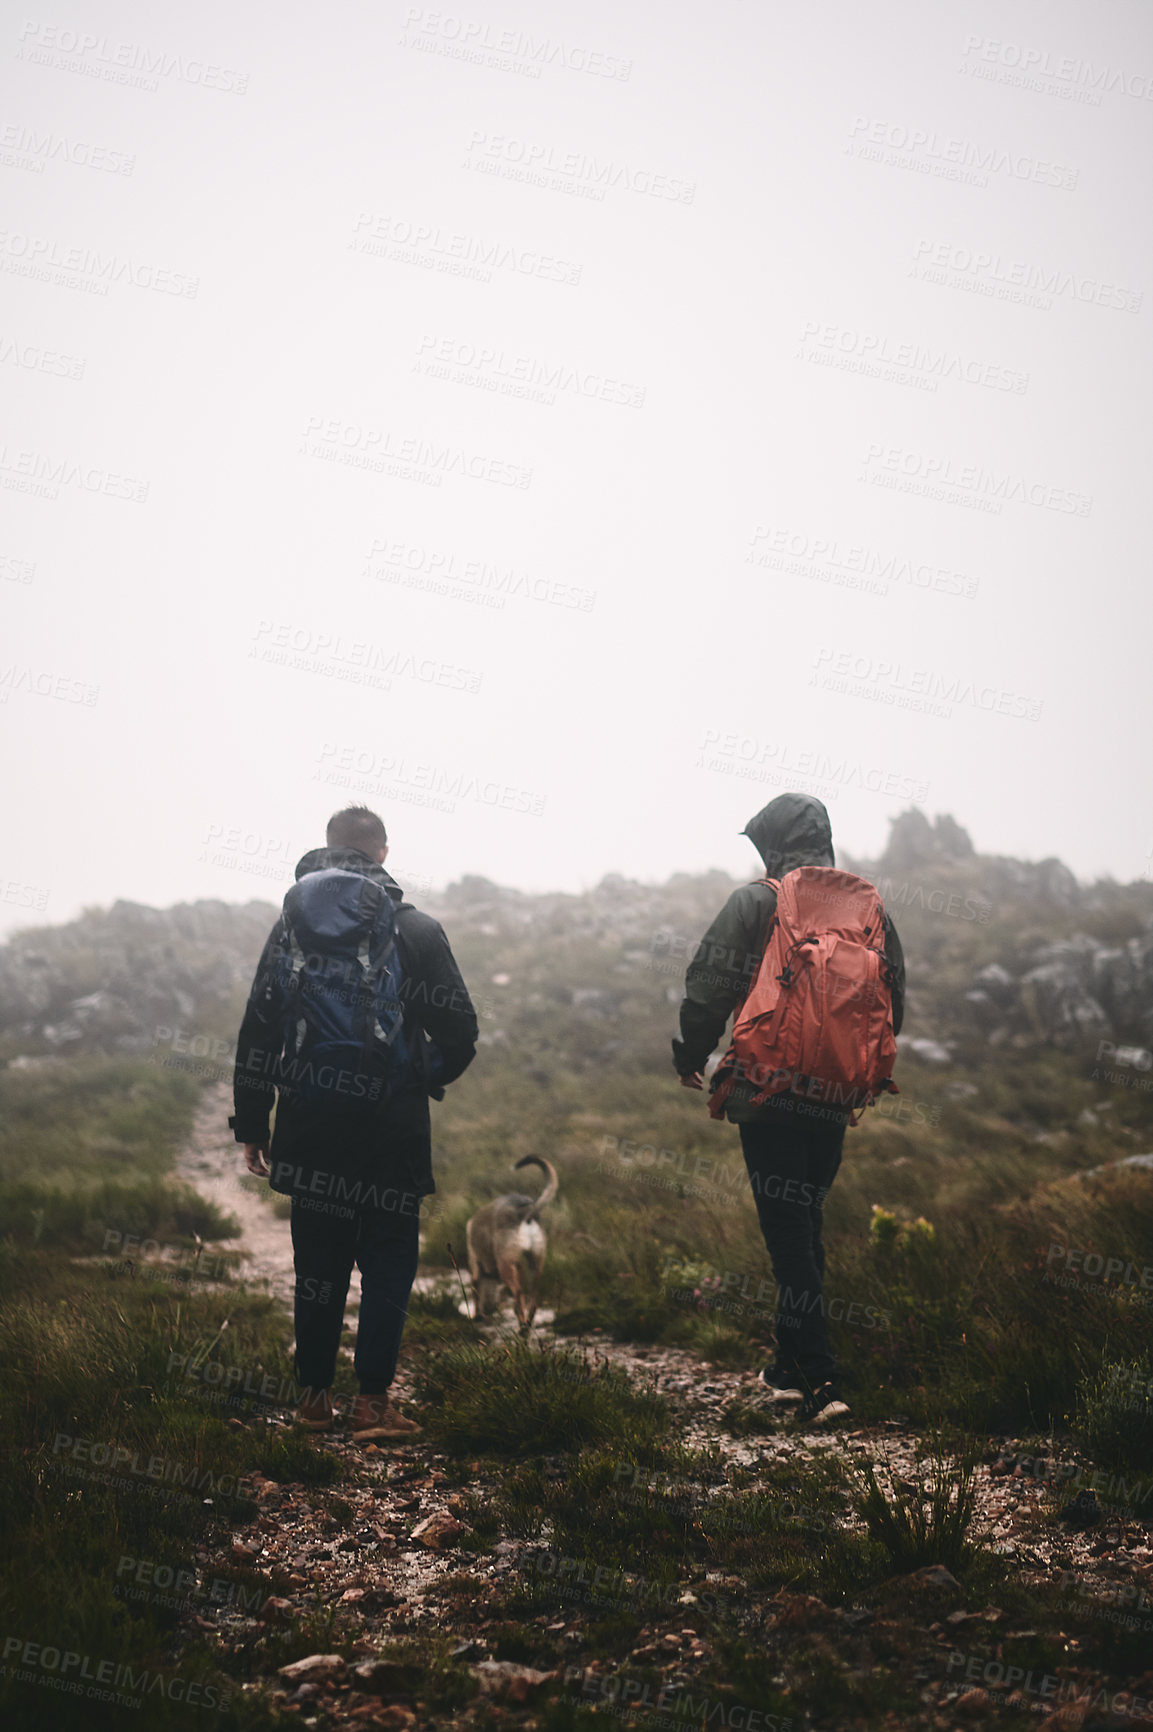 Buy stock photo Shot of two friends and a dog out hiking in the mountains on a foggy day